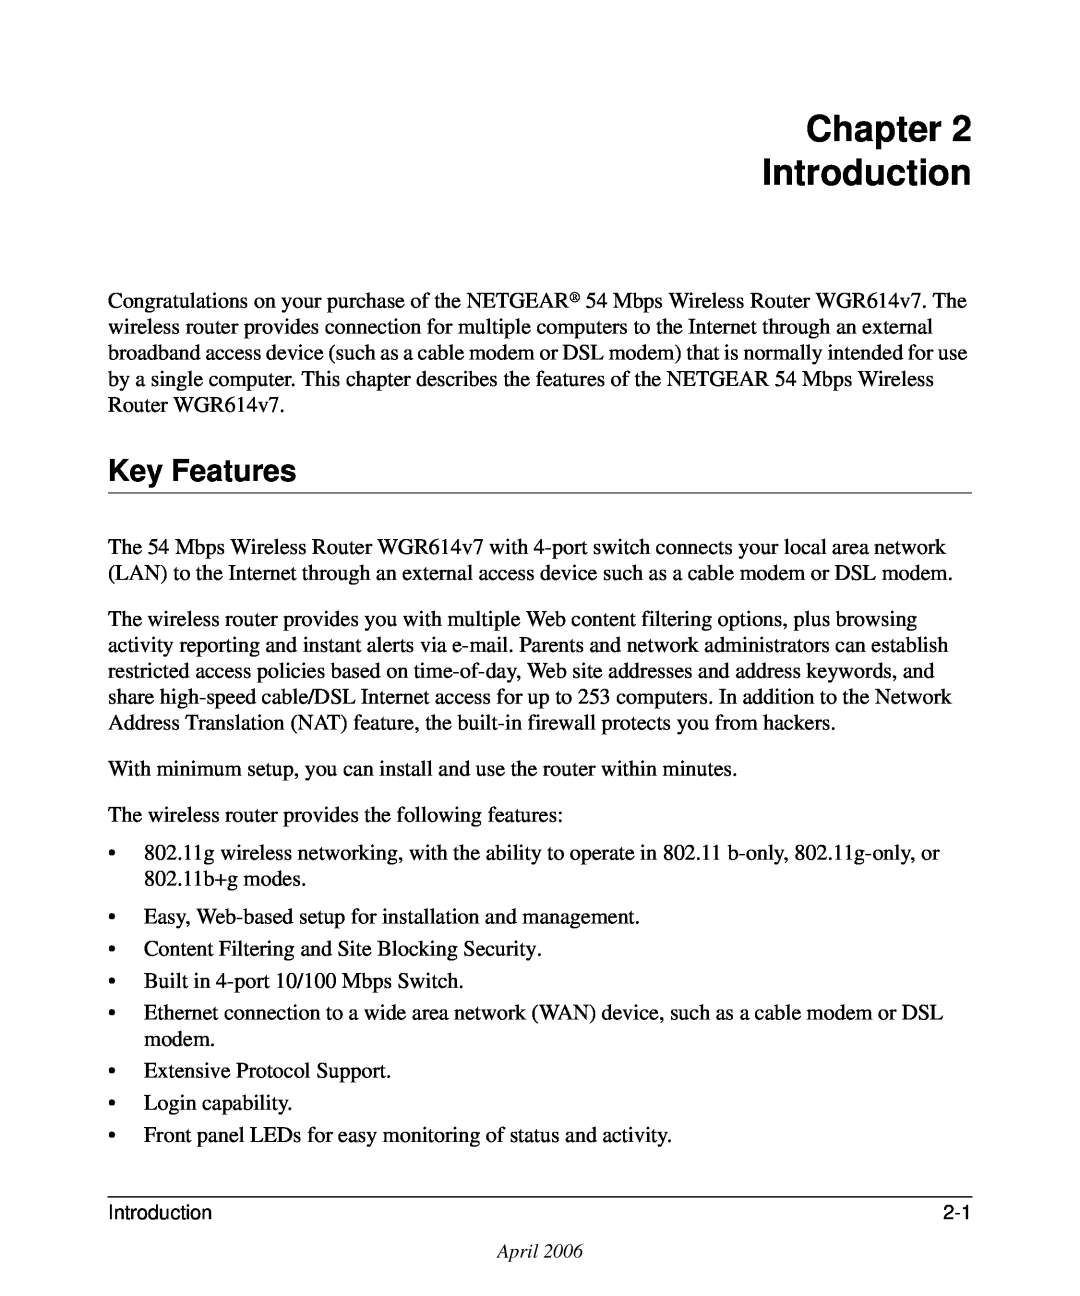 NETGEAR WGR614v7 manual Chapter Introduction, Key Features 